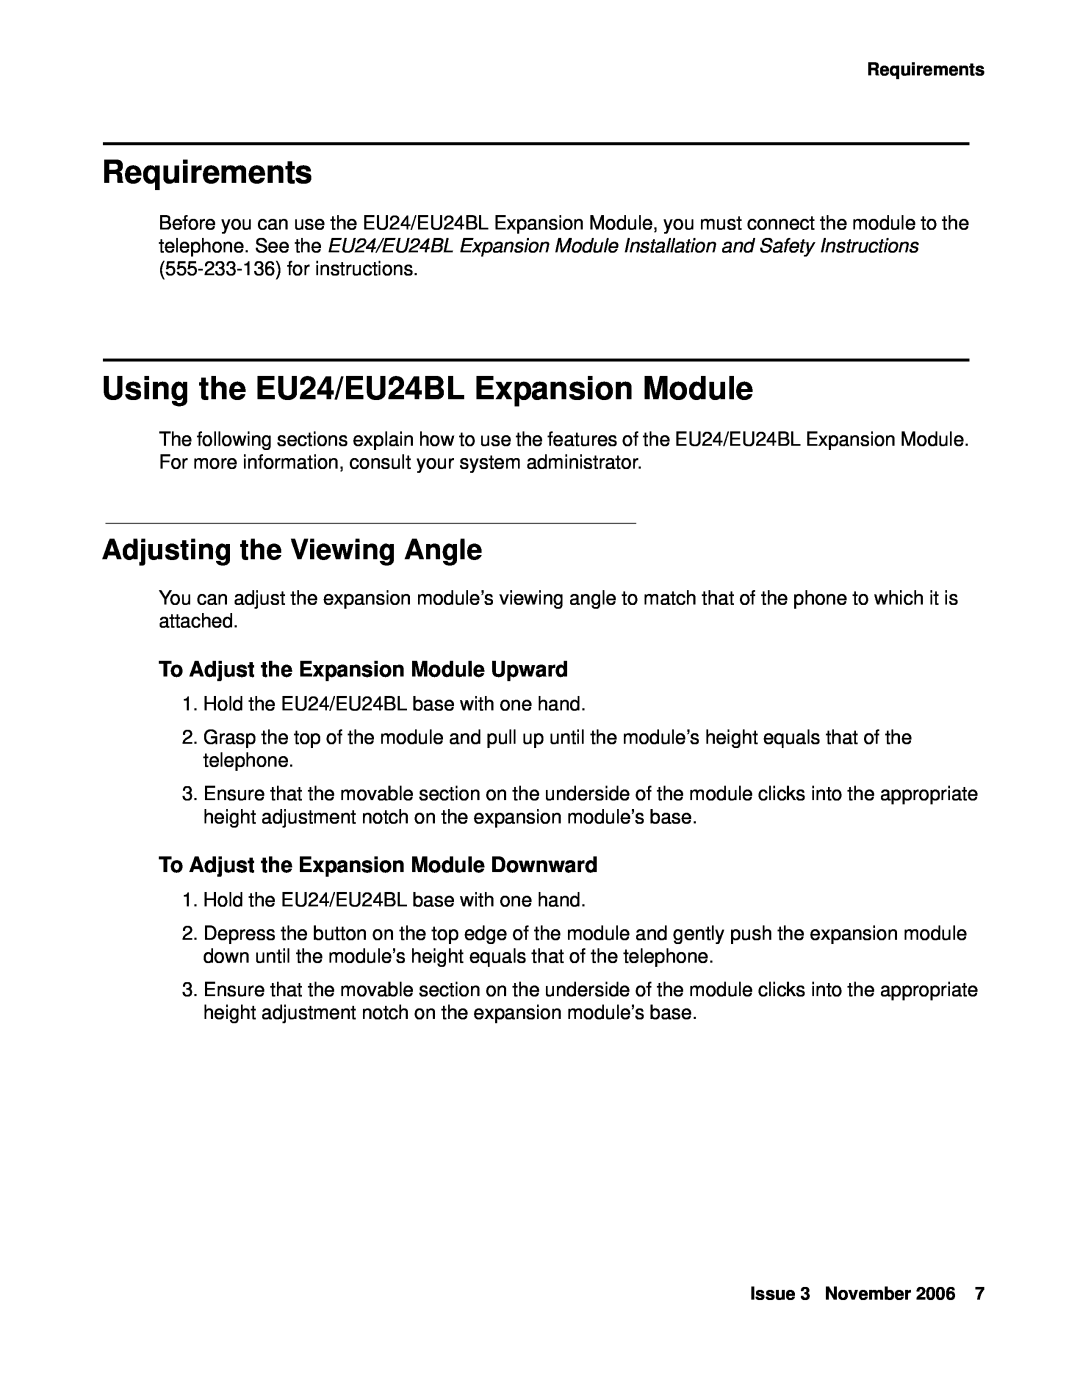 Avaya manual Requirements, Using the EU24/EU24BL Expansion Module, Adjusting the Viewing Angle 